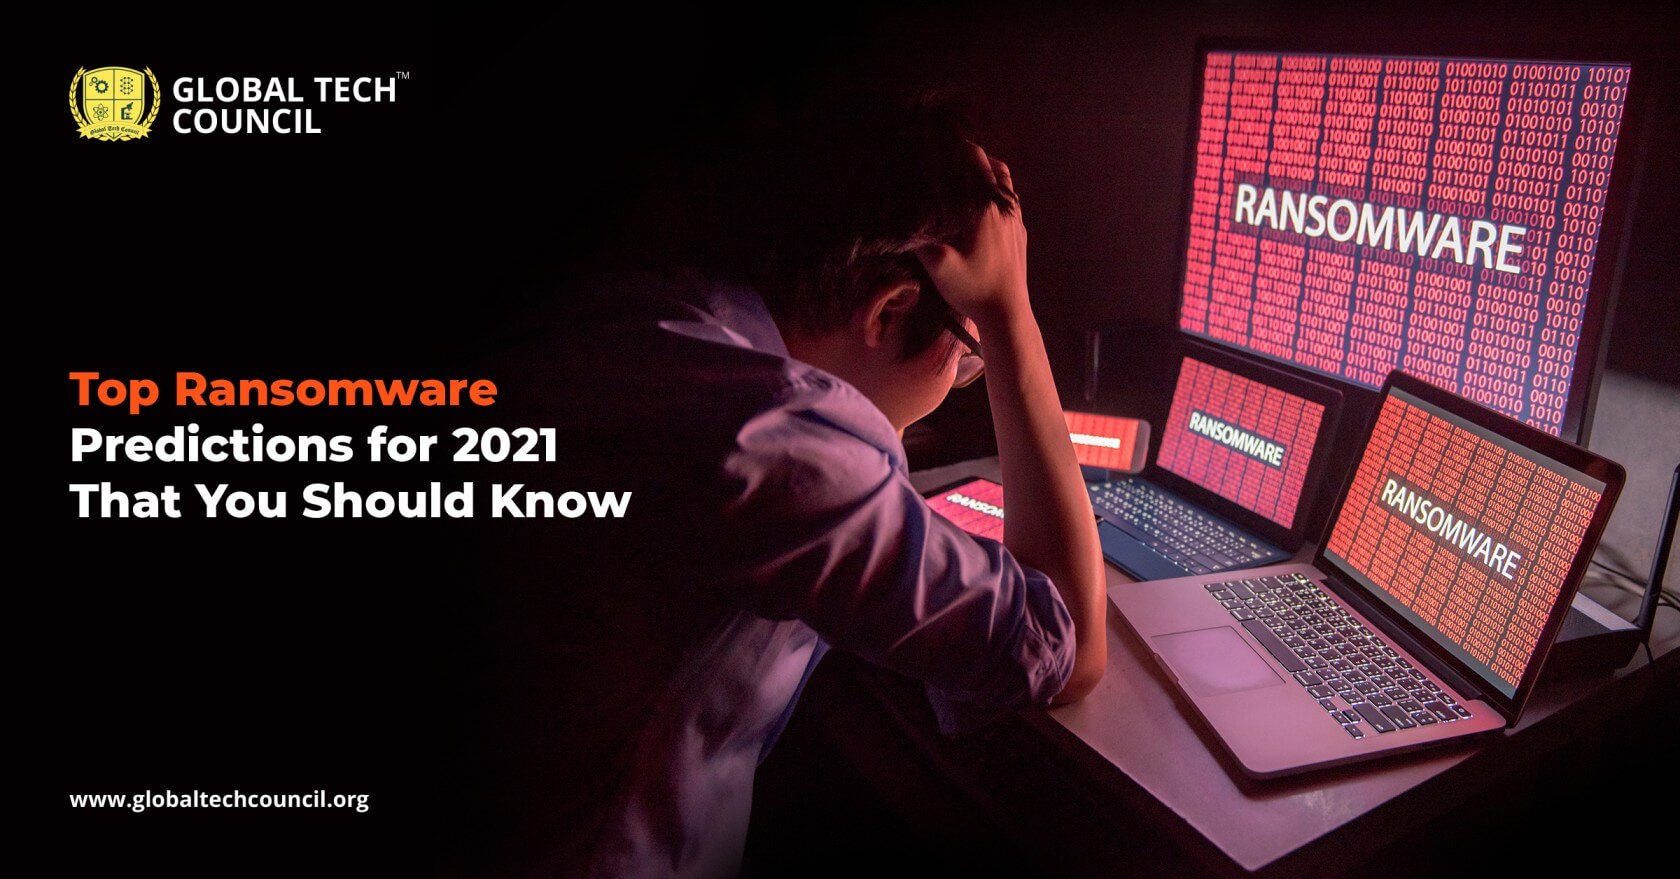 Top-Ransomware-Predictions-for-2021-That-You-Should-Know-1